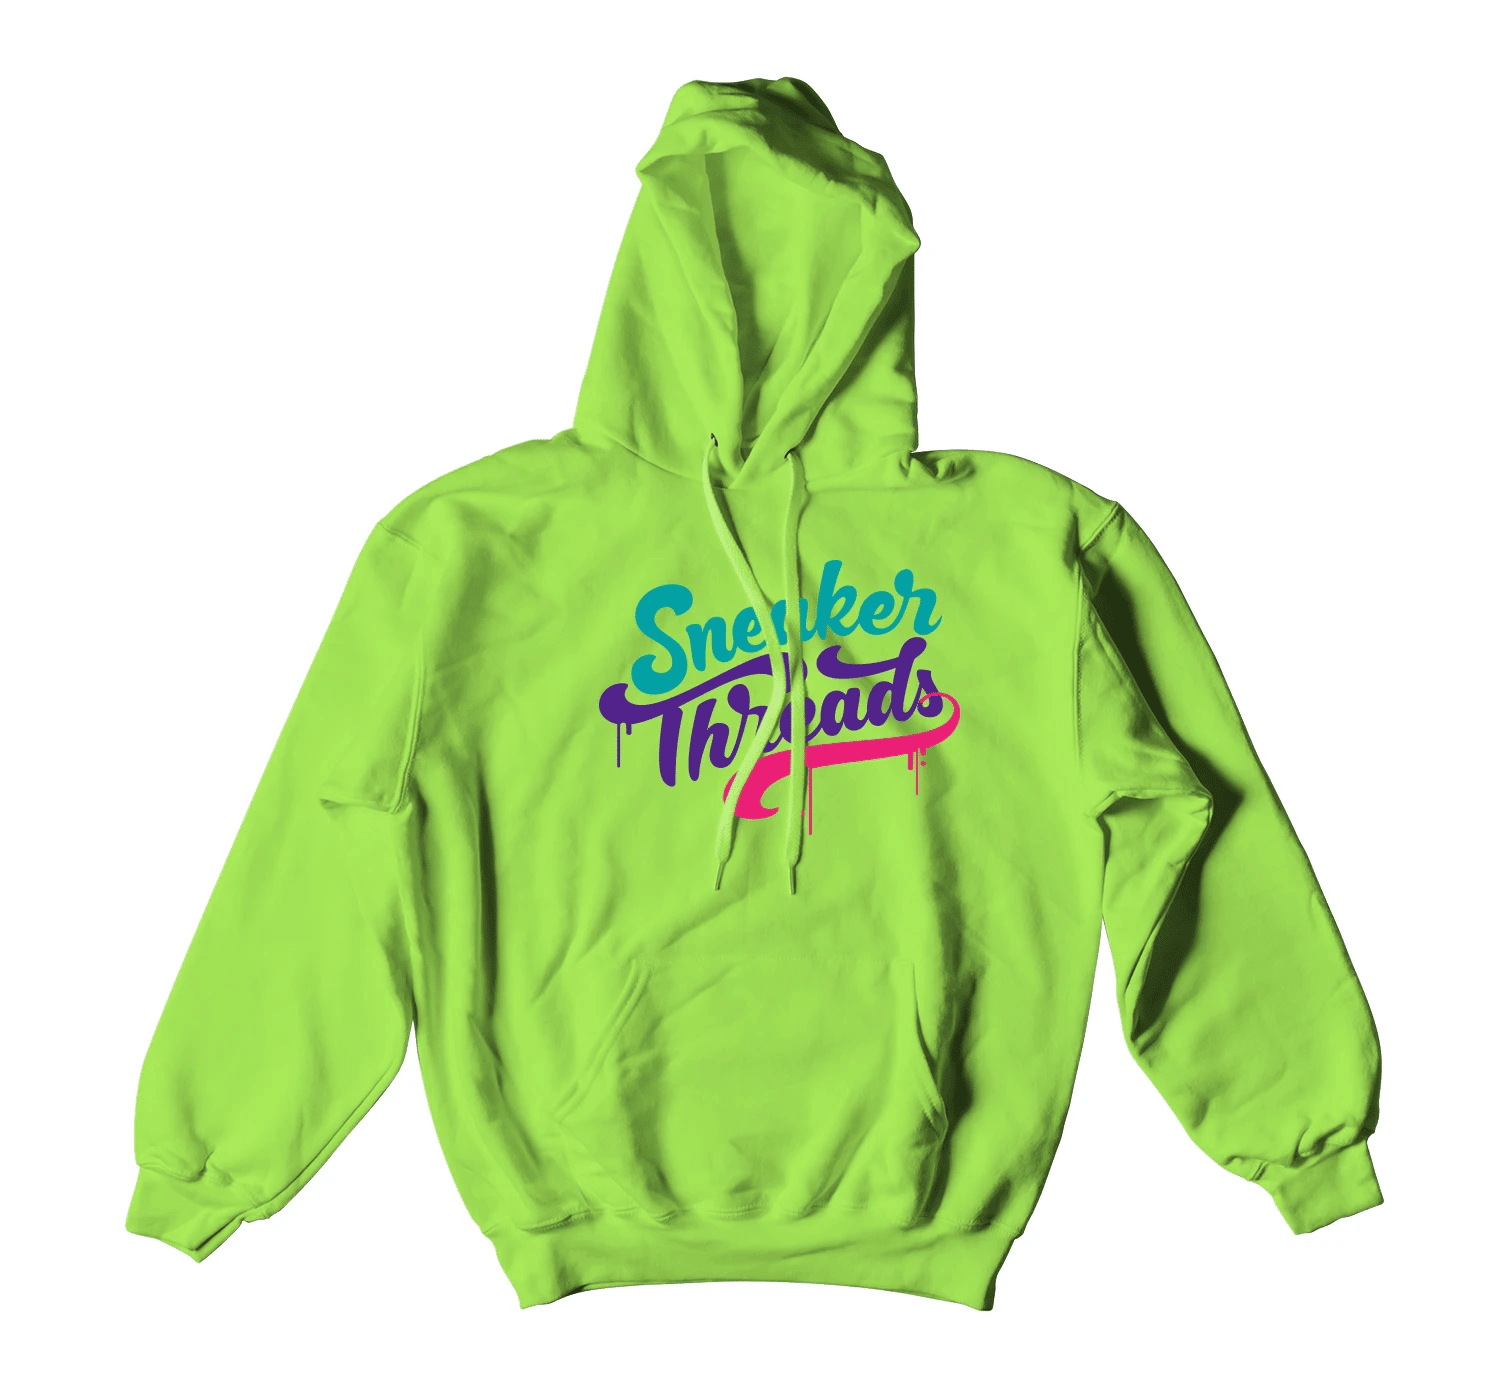 All Star 2020 Swackhammer ST Drip Hoodie Outfit